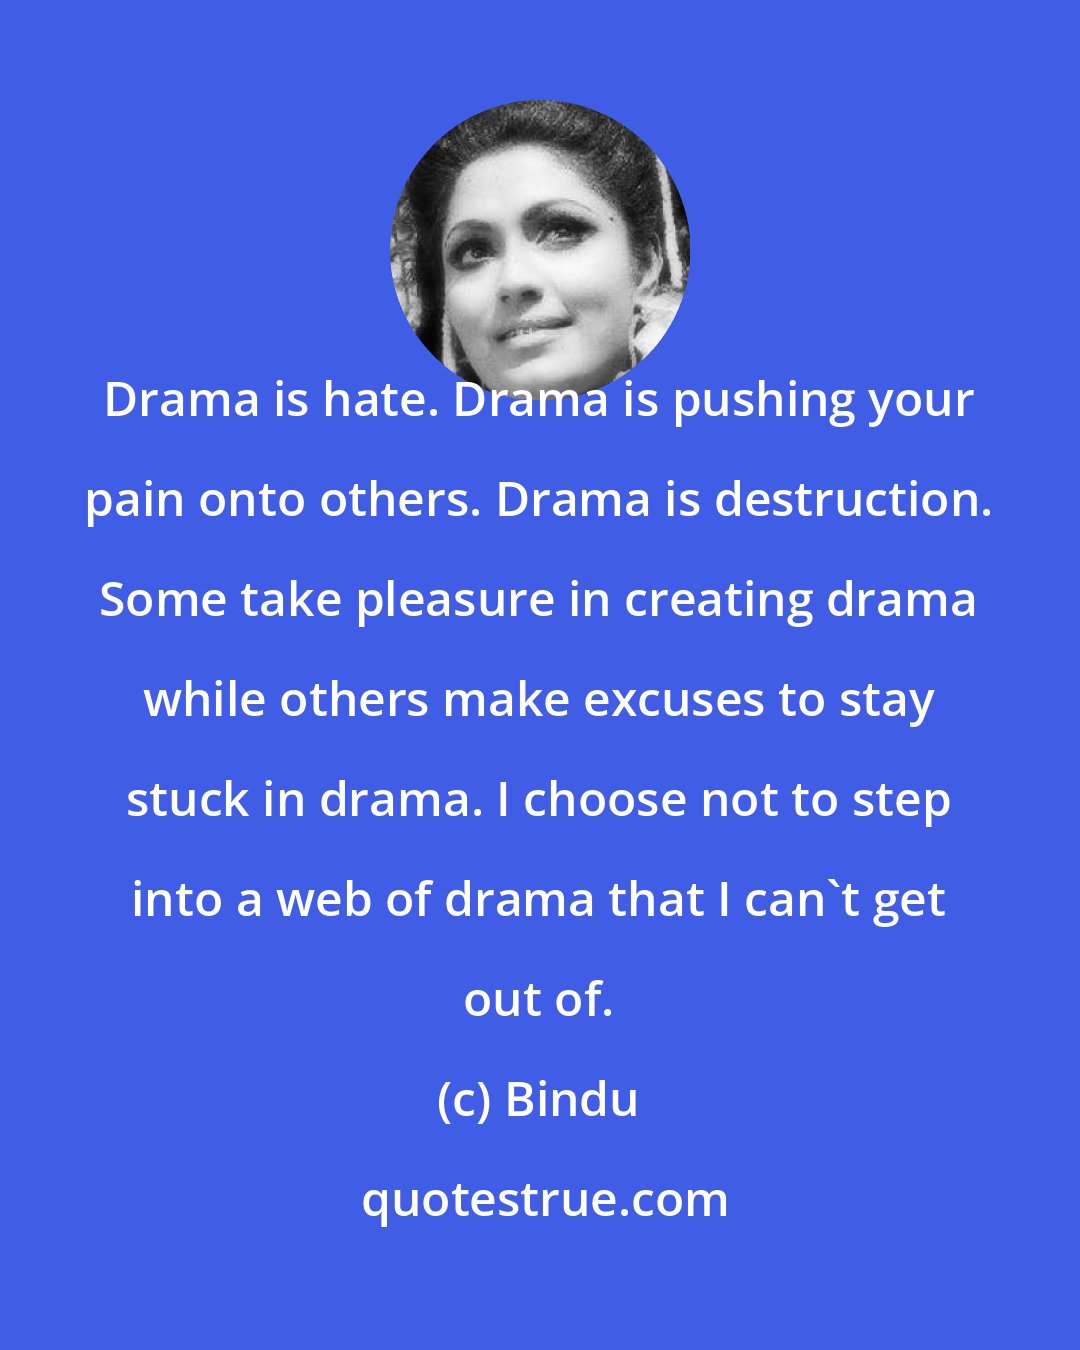 Bindu: Drama is hate. Drama is pushing your pain onto others. Drama is destruction. Some take pleasure in creating drama while others make excuses to stay stuck in drama. I choose not to step into a web of drama that I can't get out of.